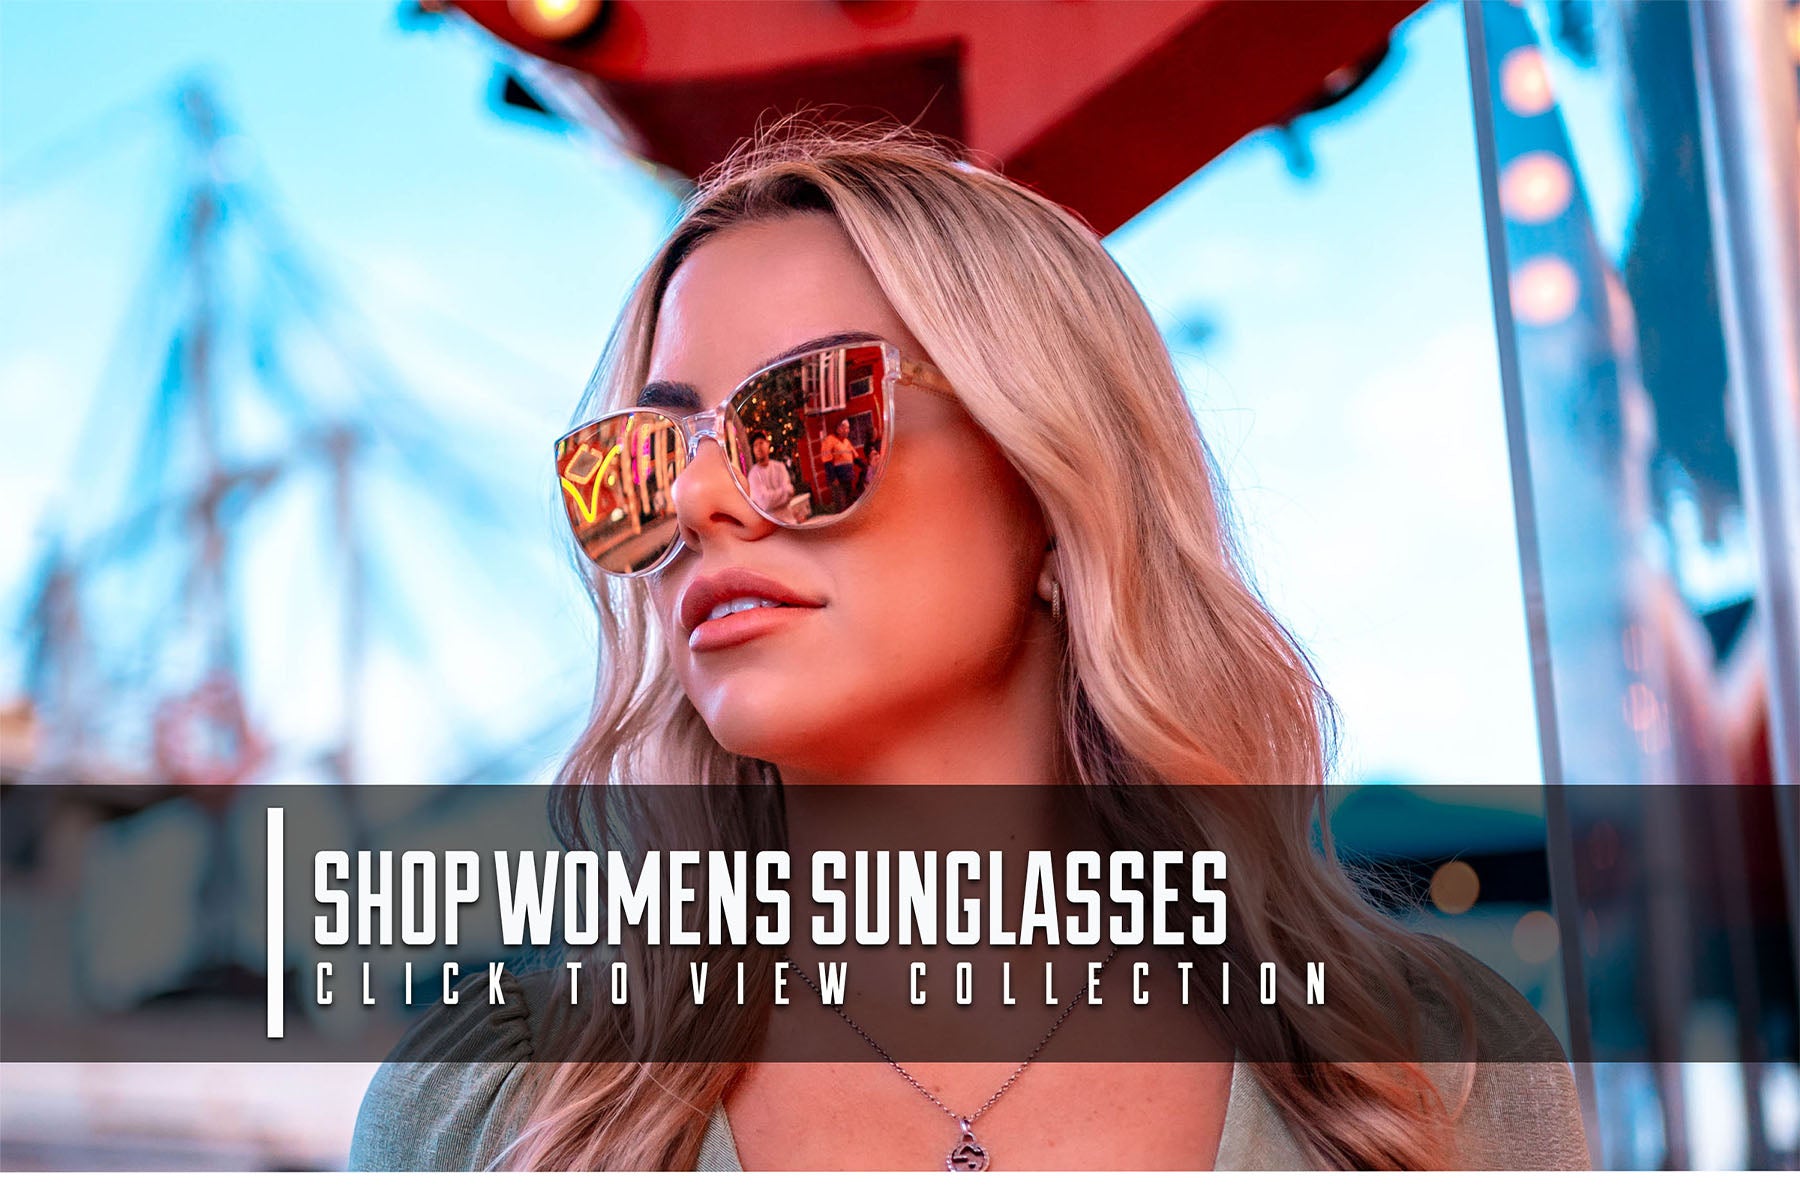 Heat Wave Visual Australia Lazer Face. Shop Online Free Same Day Shipping Australia Wide. Afterpay it. AS/NZS1337.1 Safety Glasses. From The Shop To The Street And Everywhere In Between. Shop Polarized Sunglasses. Heat Wave Glasses